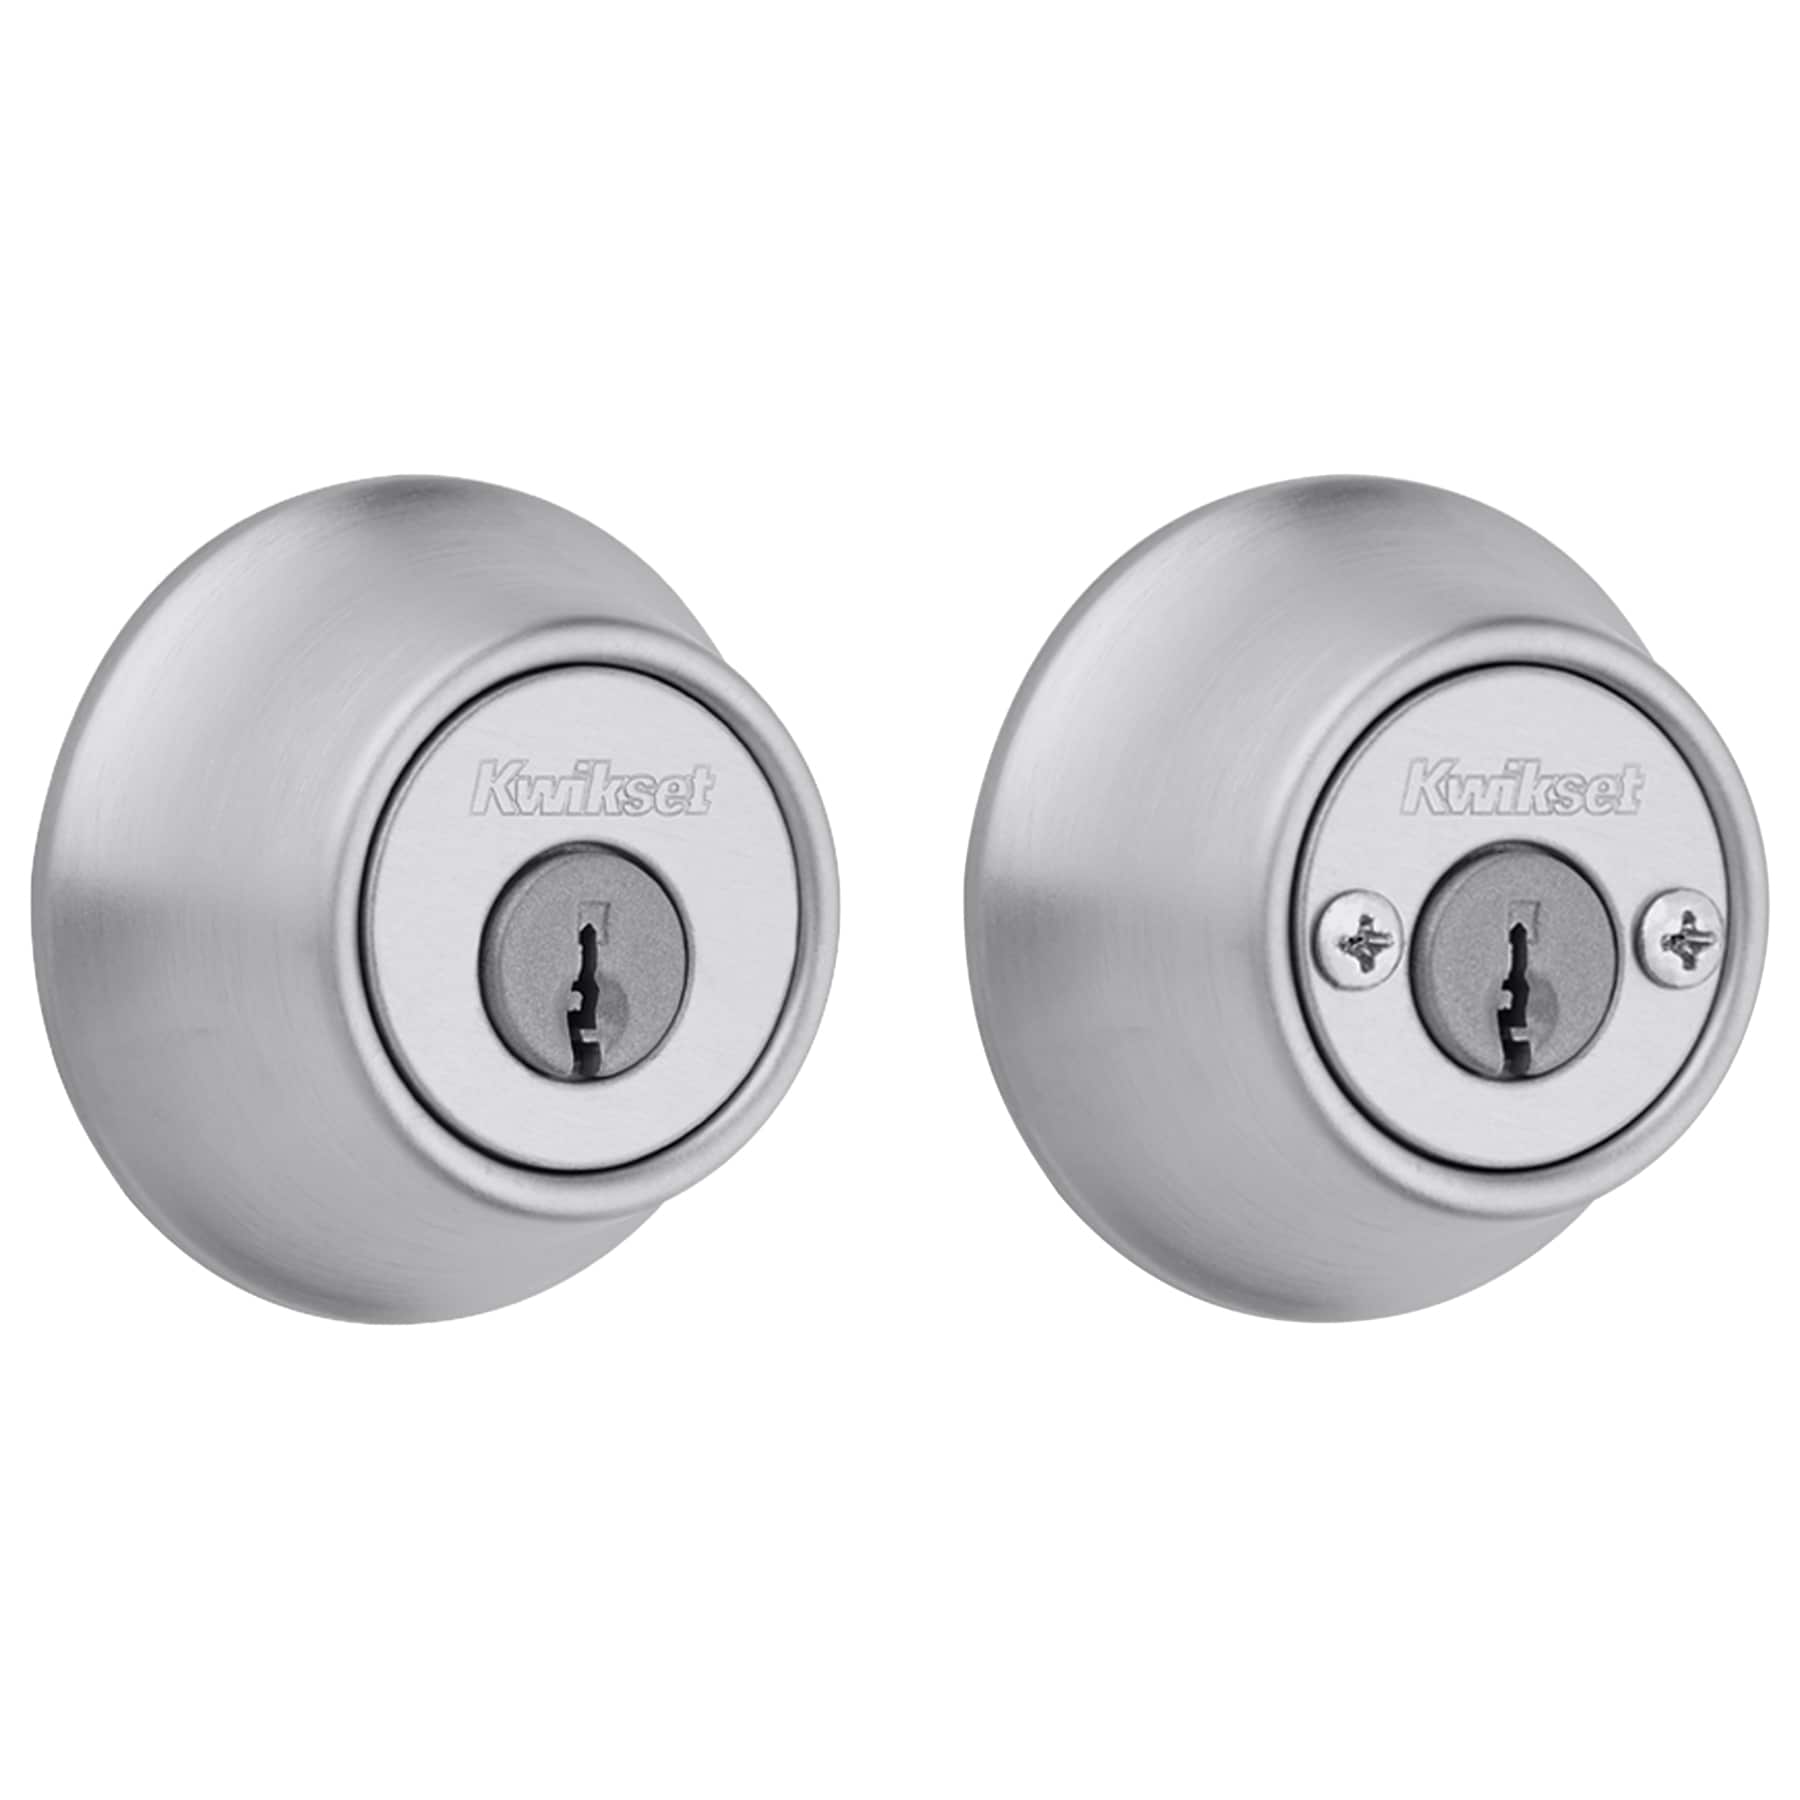 Kwikset 665-S Double Cylinder Deadbolt with SmartKey from the 660 Series, Antique Brass by Kwikset - 2